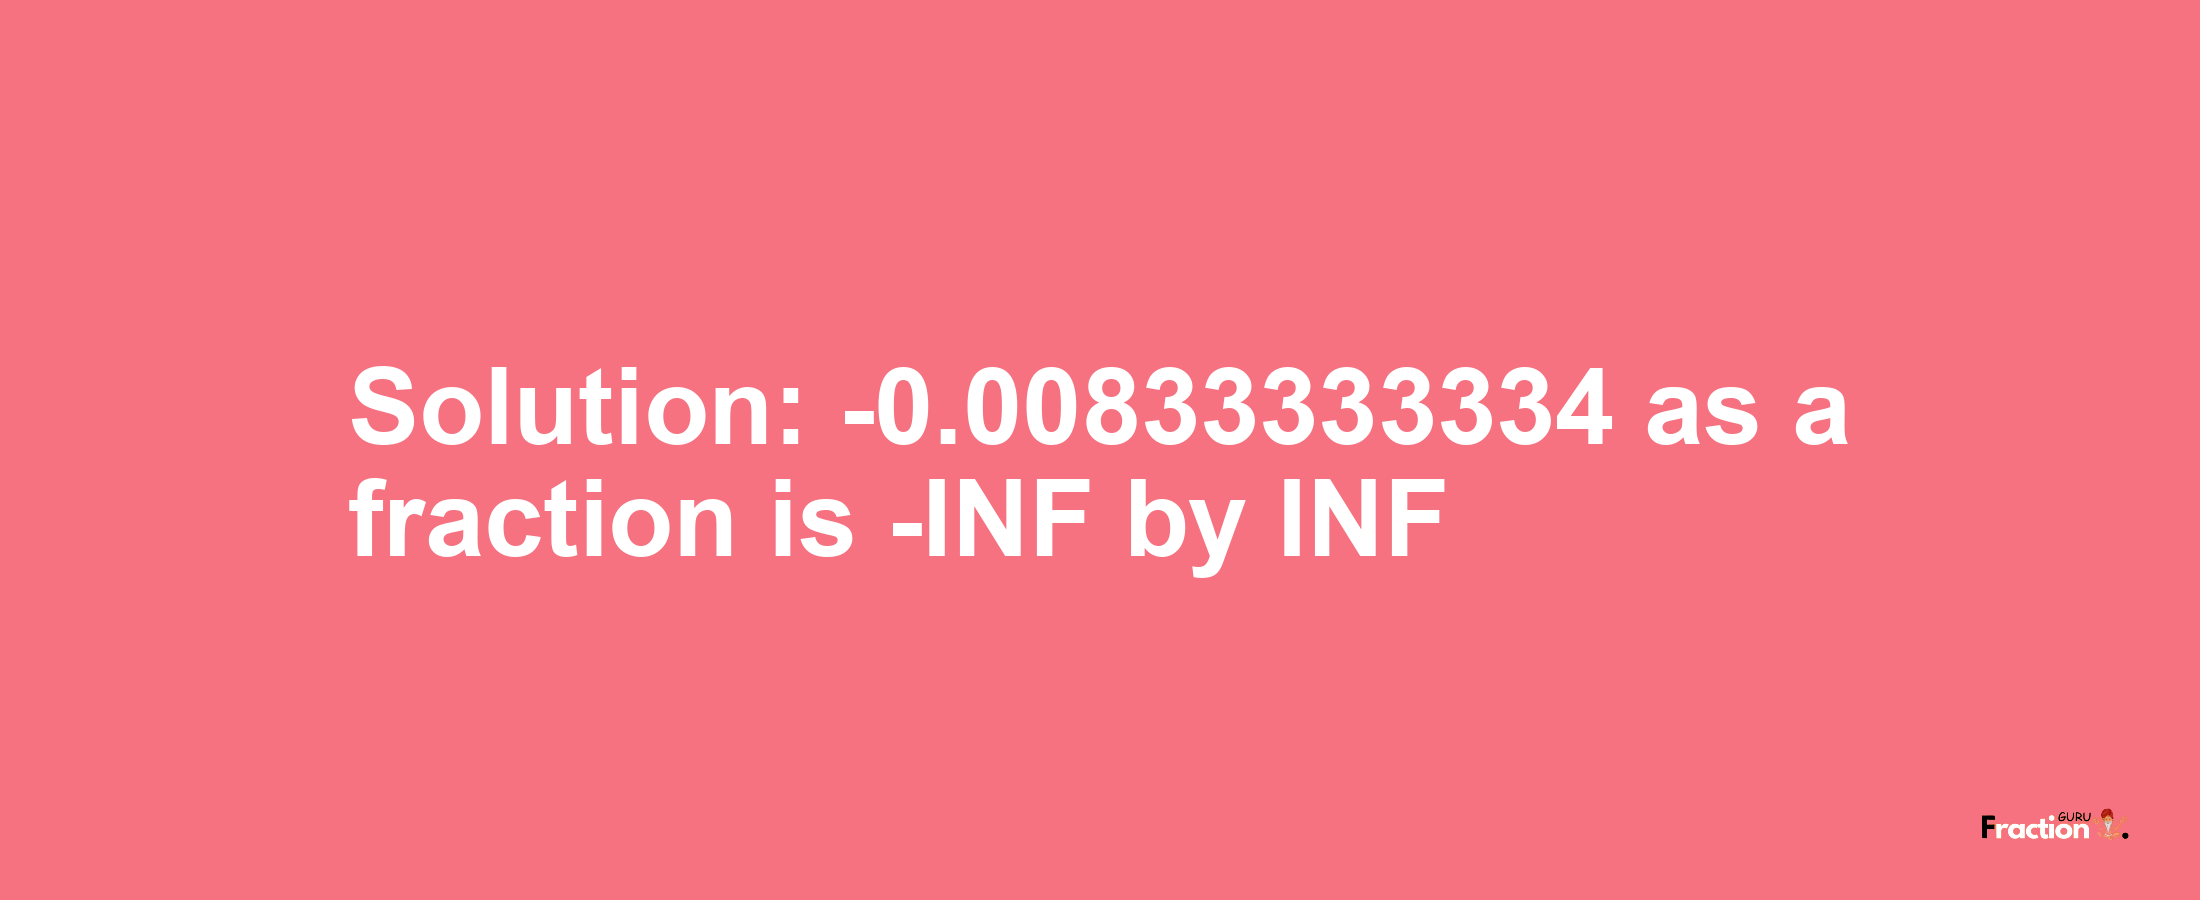 Solution:-0.00833333334 as a fraction is -INF/INF